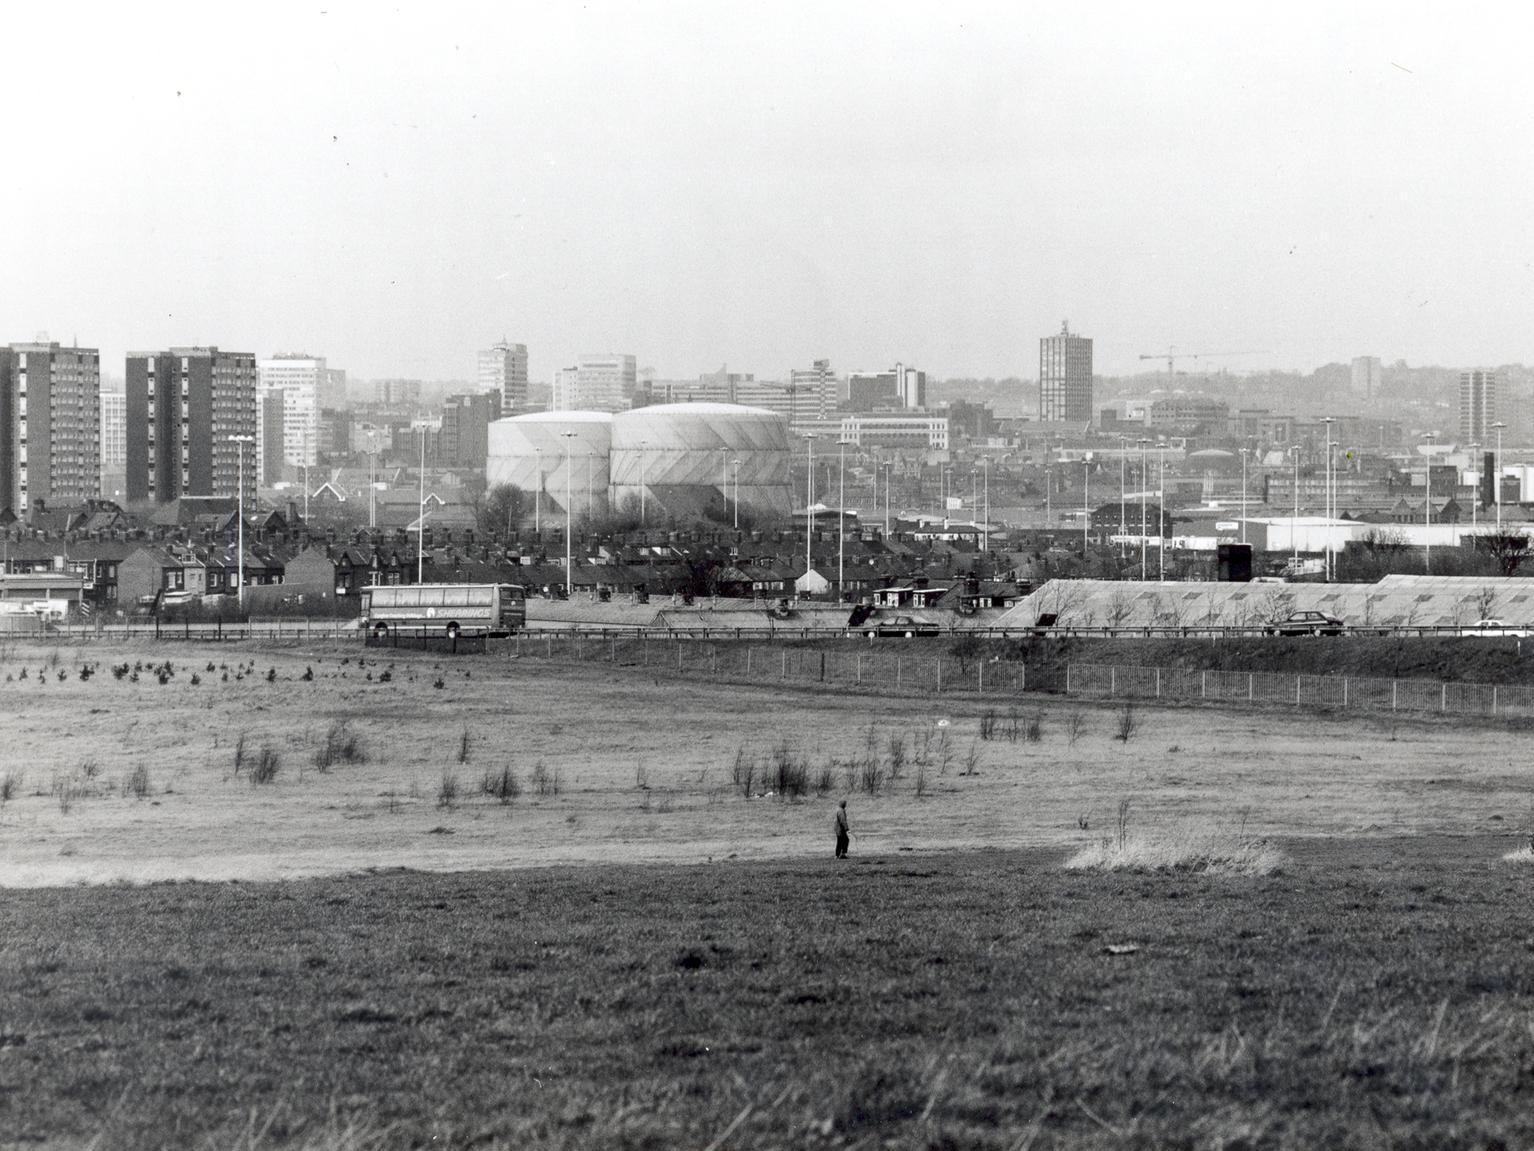 A view from Beeston looking towards the city centre.